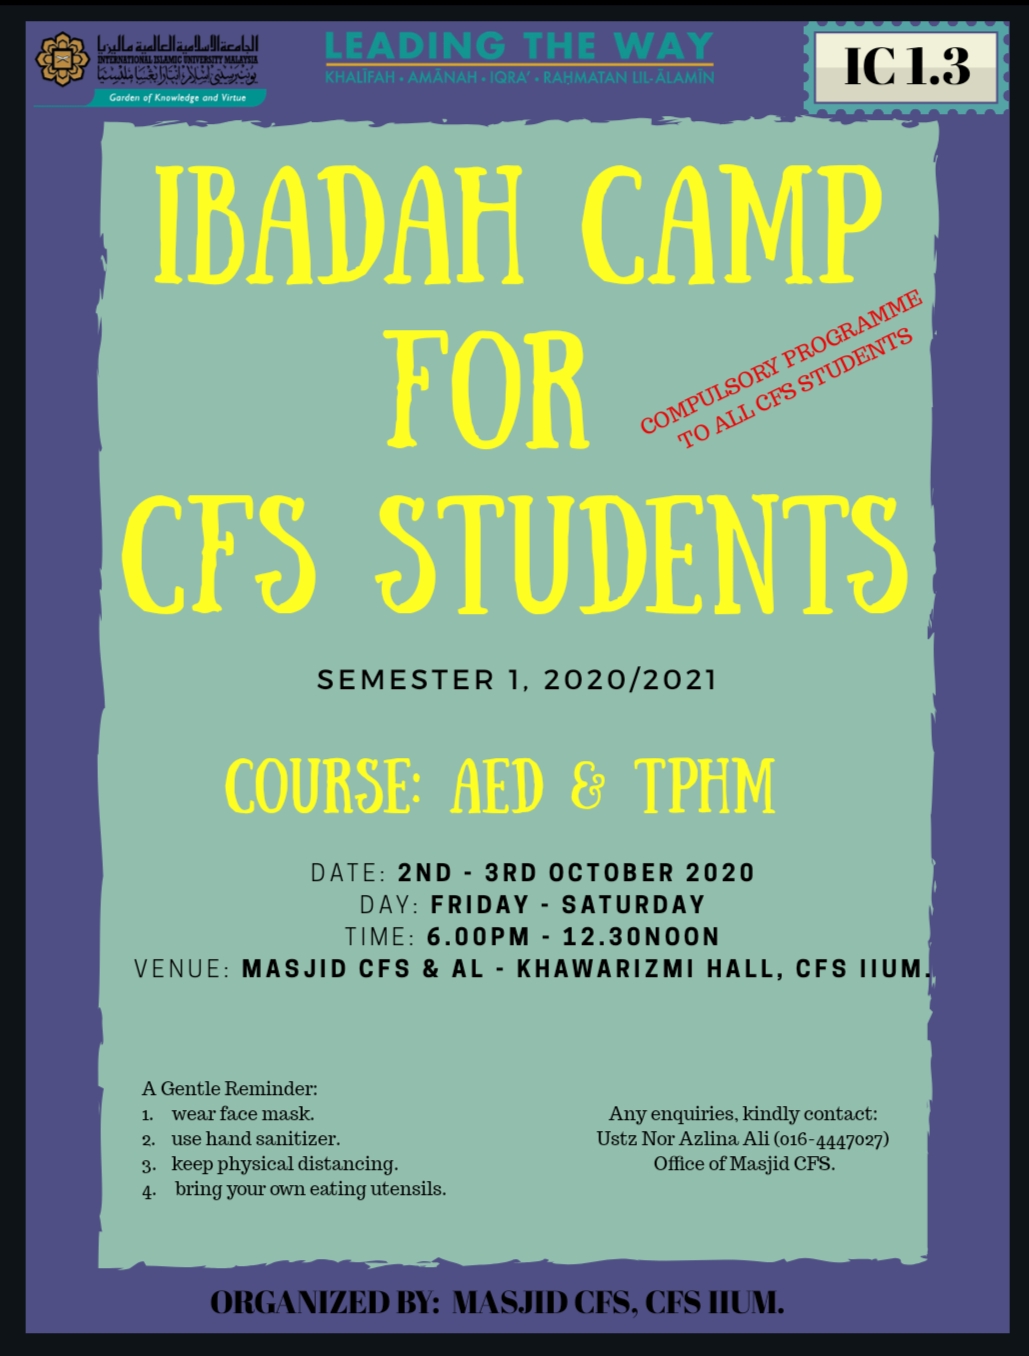 IBADAH CAMP FOR CFS STUDENT